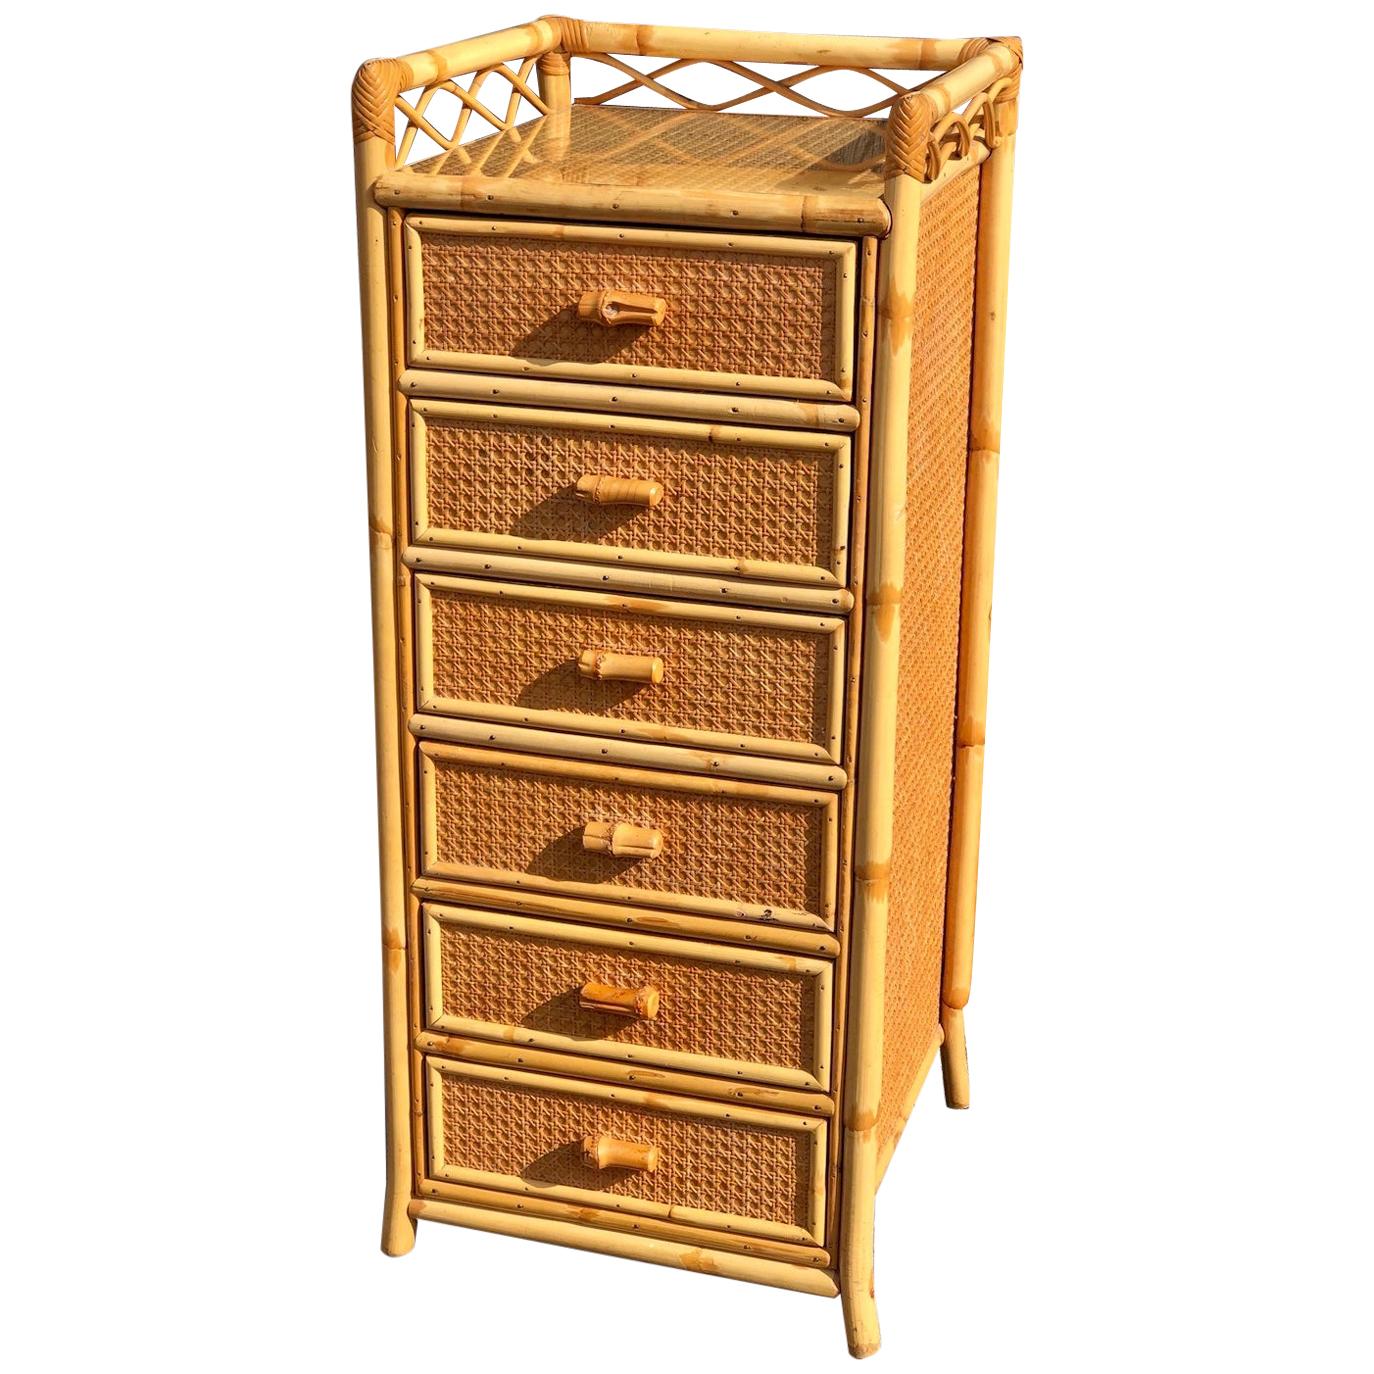 Midcentury Rattan Highboy / Tallboy Chest of Drawers by Angraves, England, 1970s